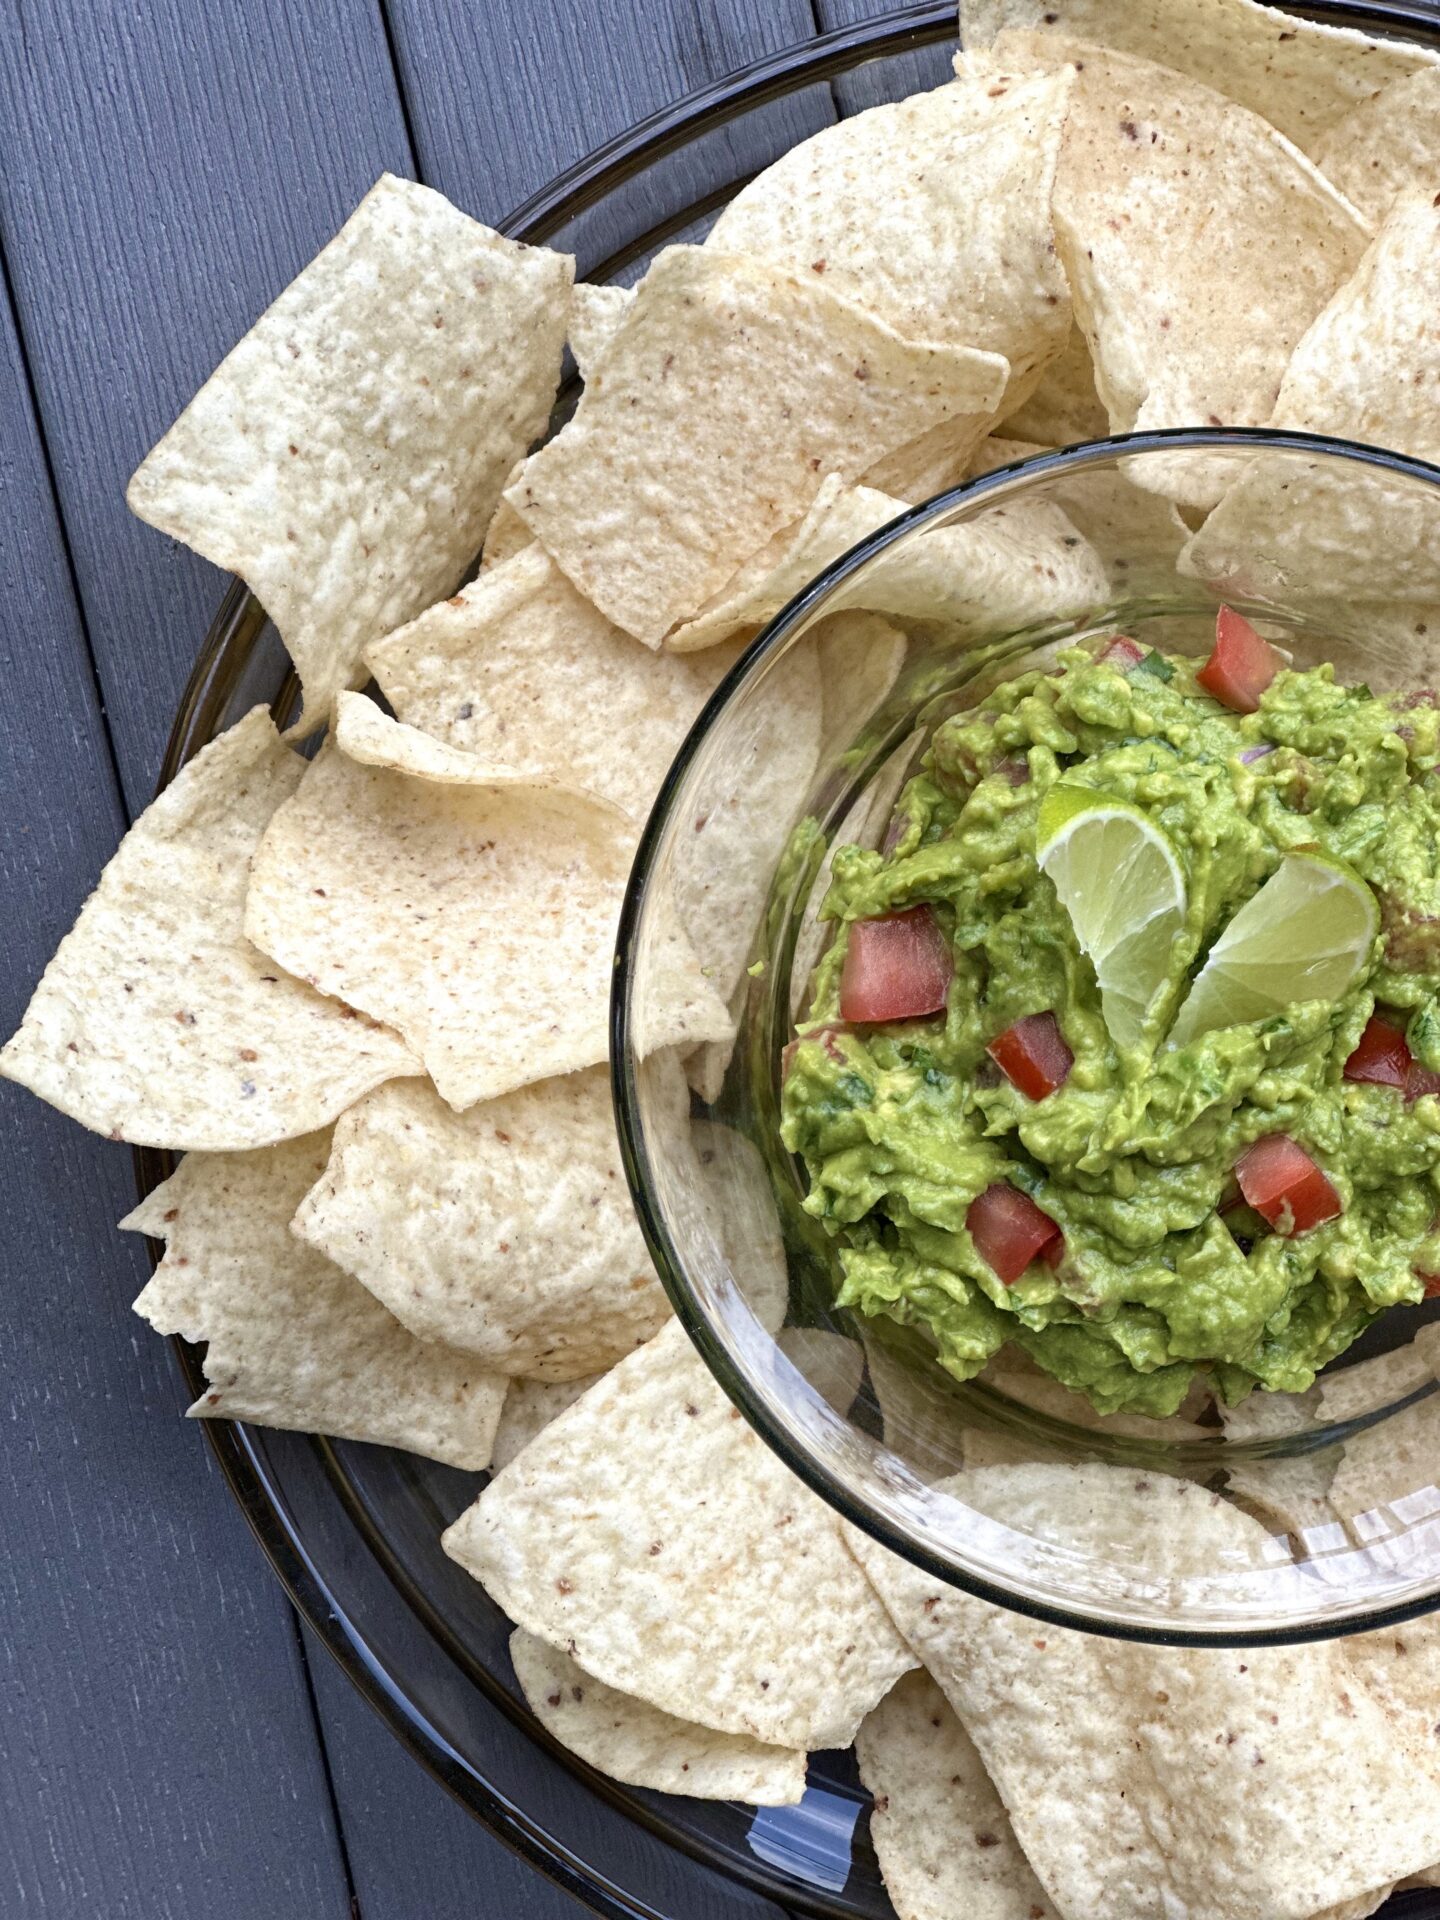  A platter of chips and fresh homemade guacamole sitting on an outdoor patio table, seen from above.